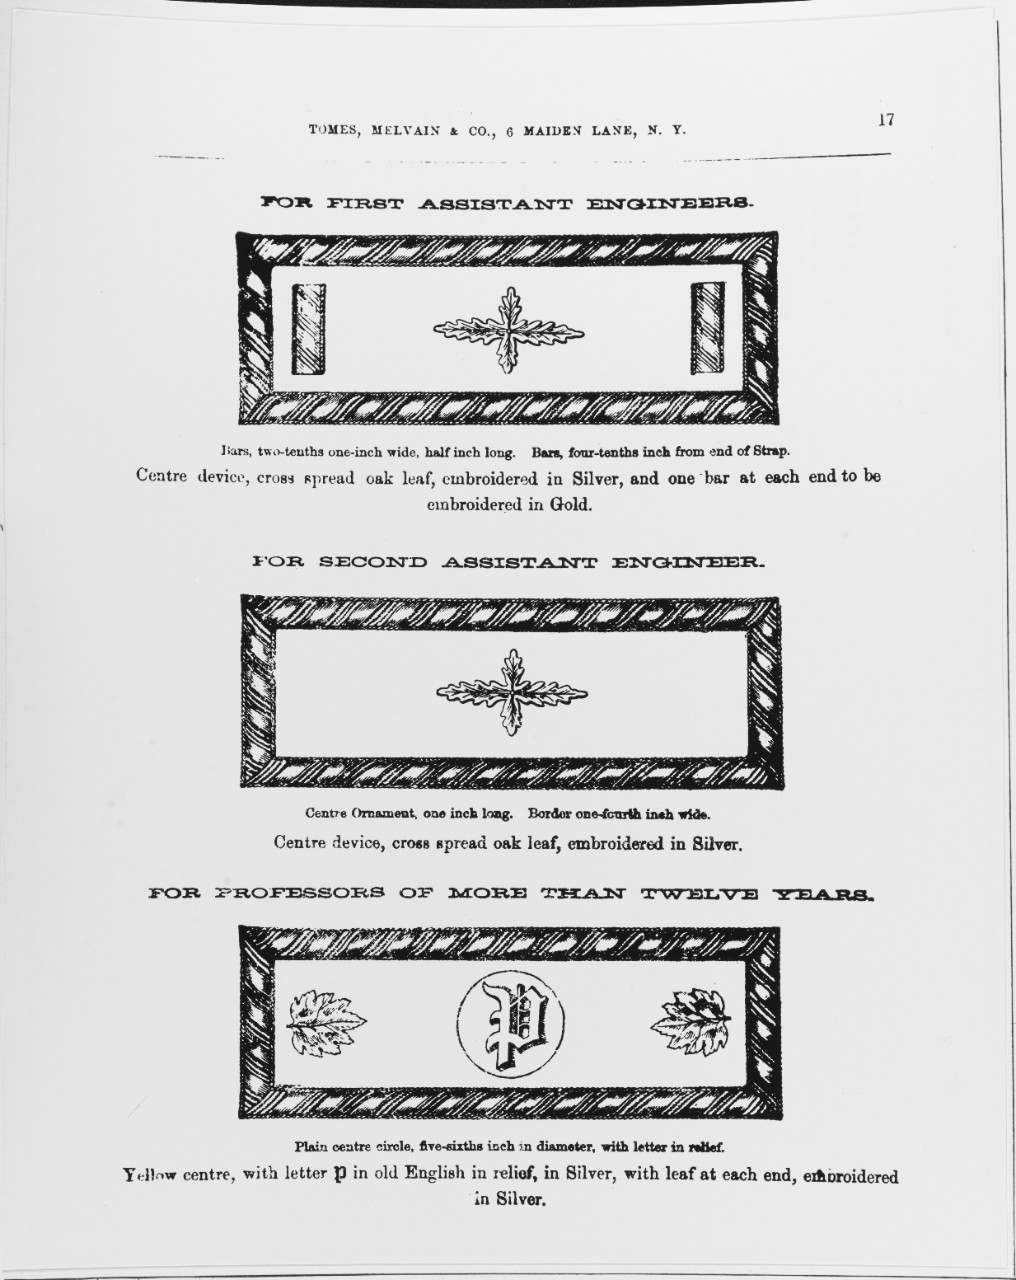 Uniform Regulations, 1864. Shoulder Insignia for First Assistant Engineers, Second Assistant Engineer, Professors